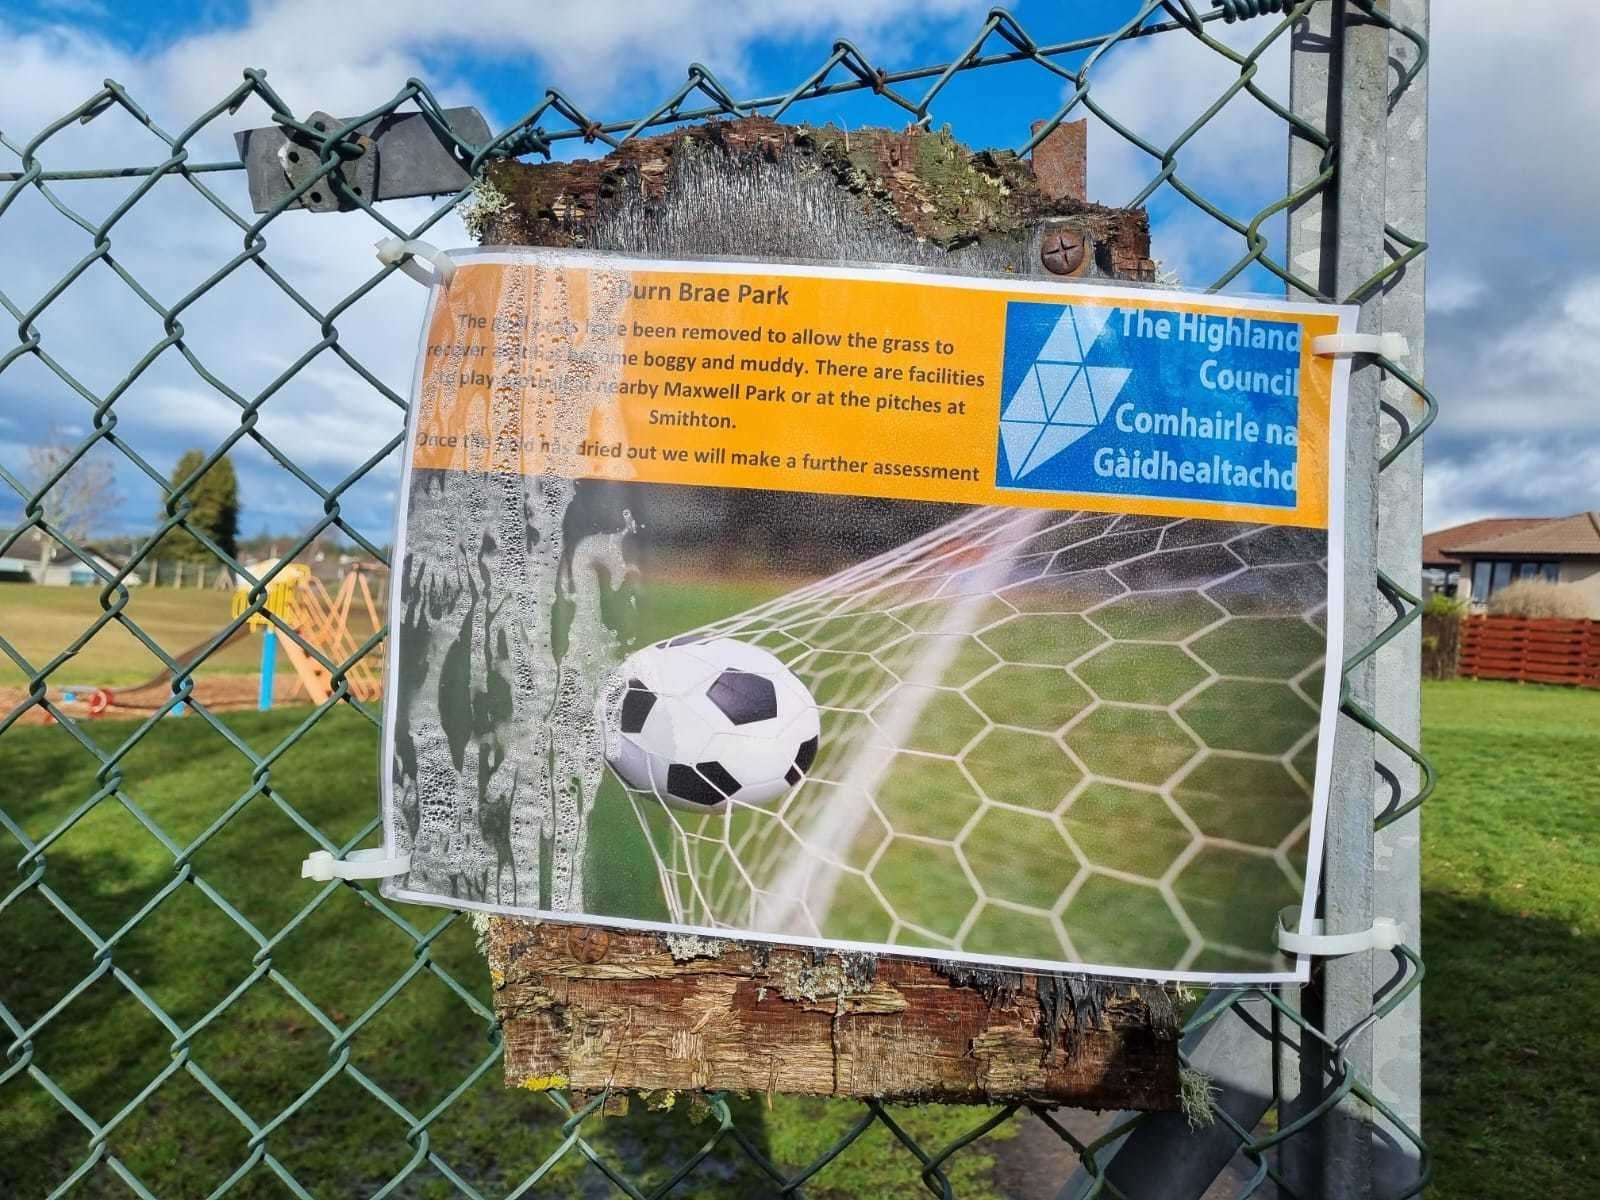 The sign at Burn Brae Park when the goalposts were removed in March.